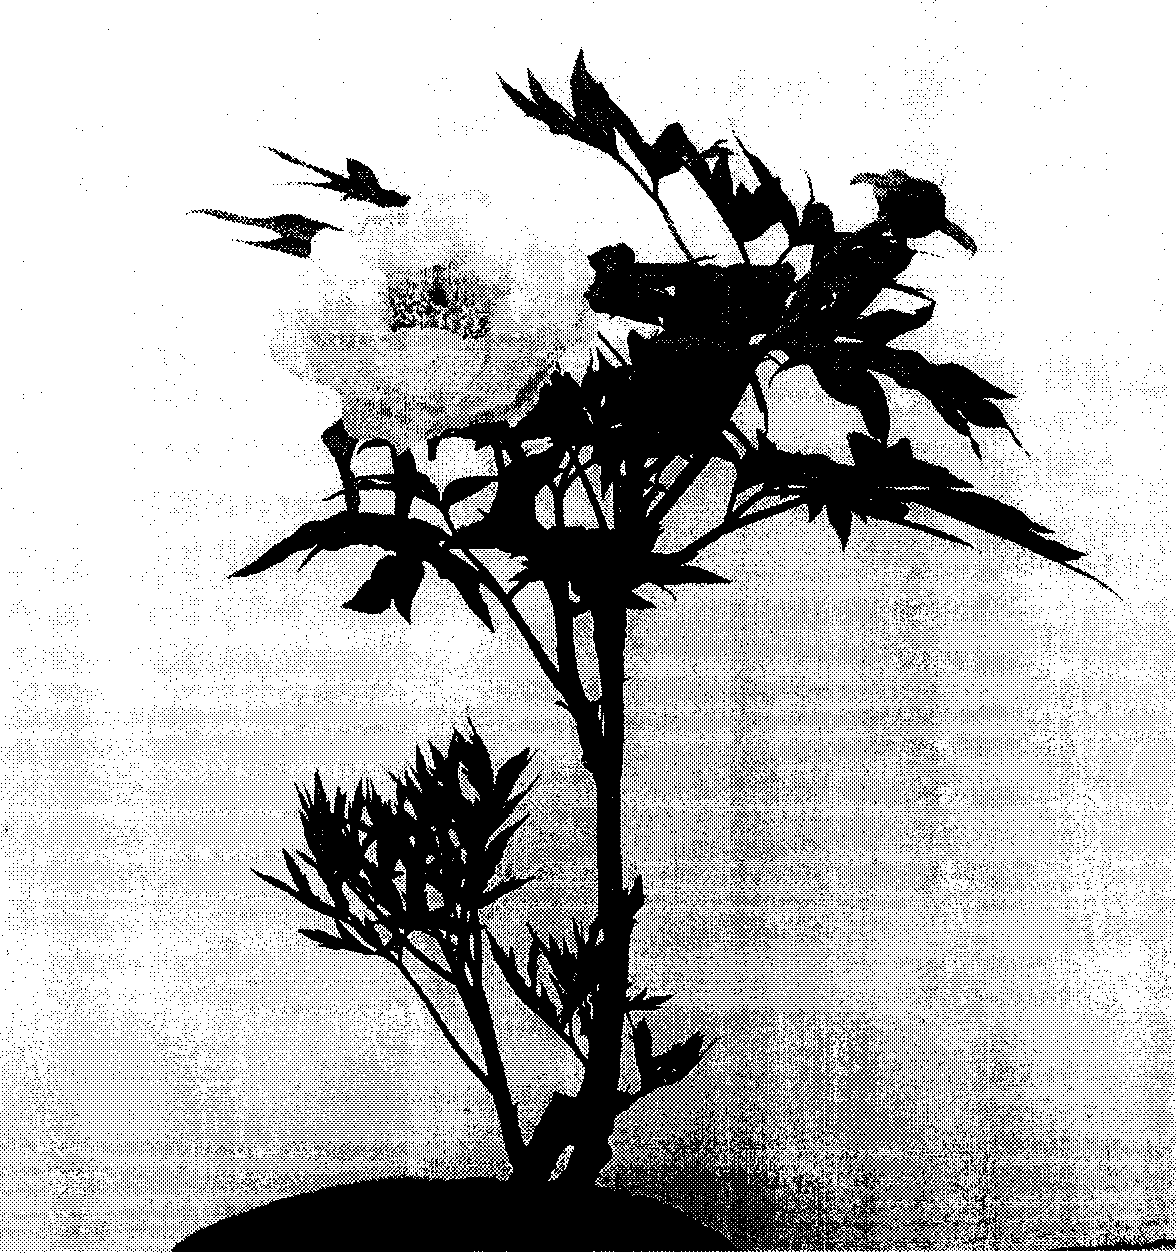 Method for regulating peony forescence